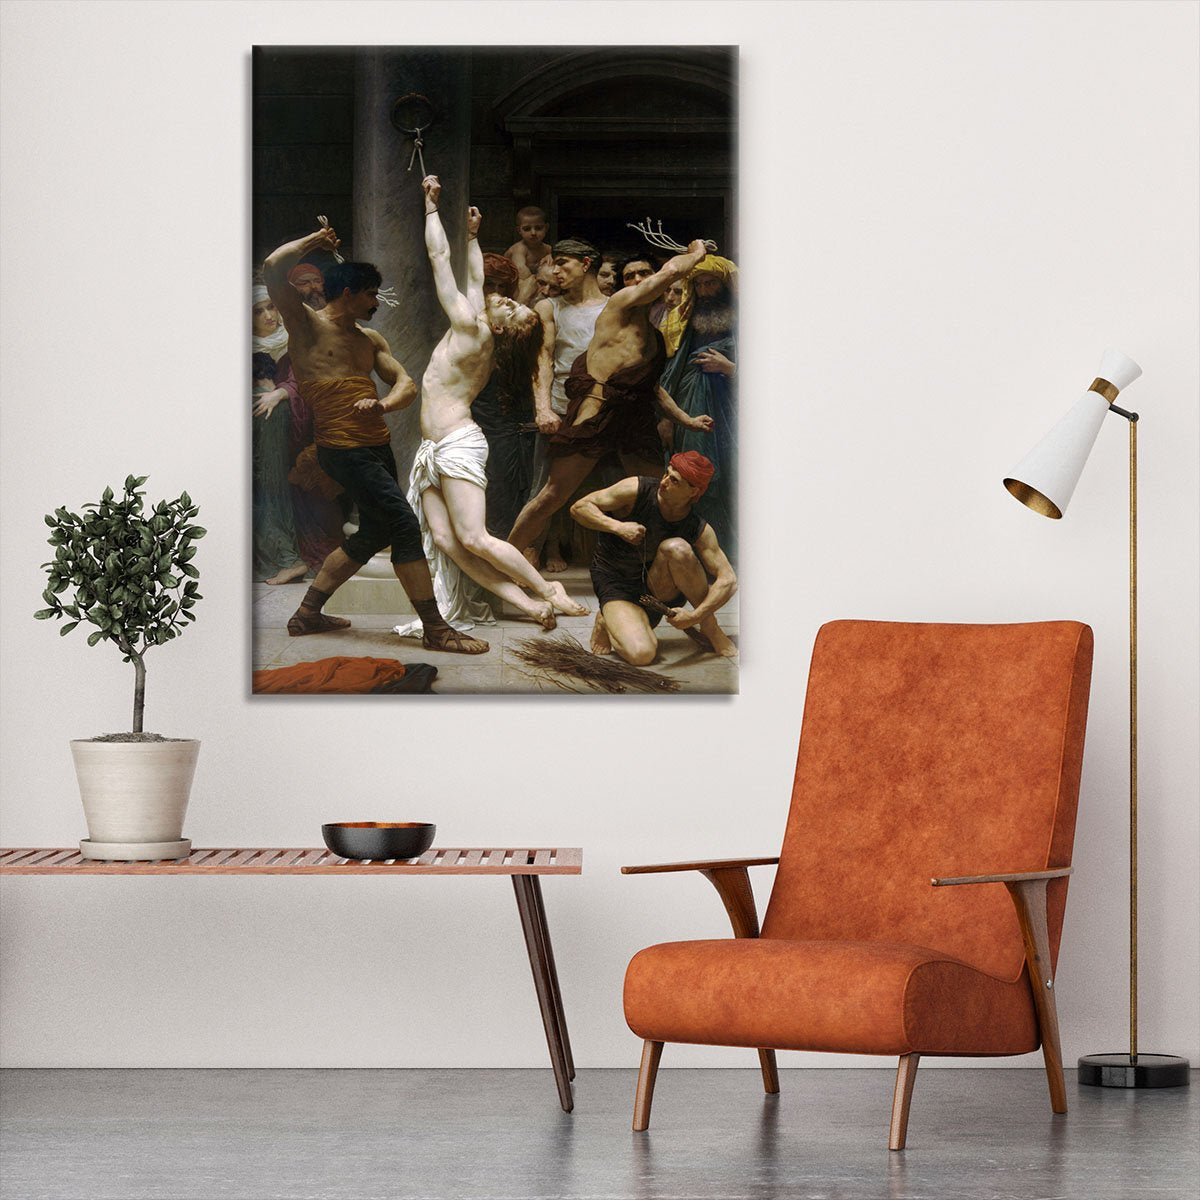 The Flagellation of Our Lord Jesus Christ By Bouguereau Canvas Print or Poster